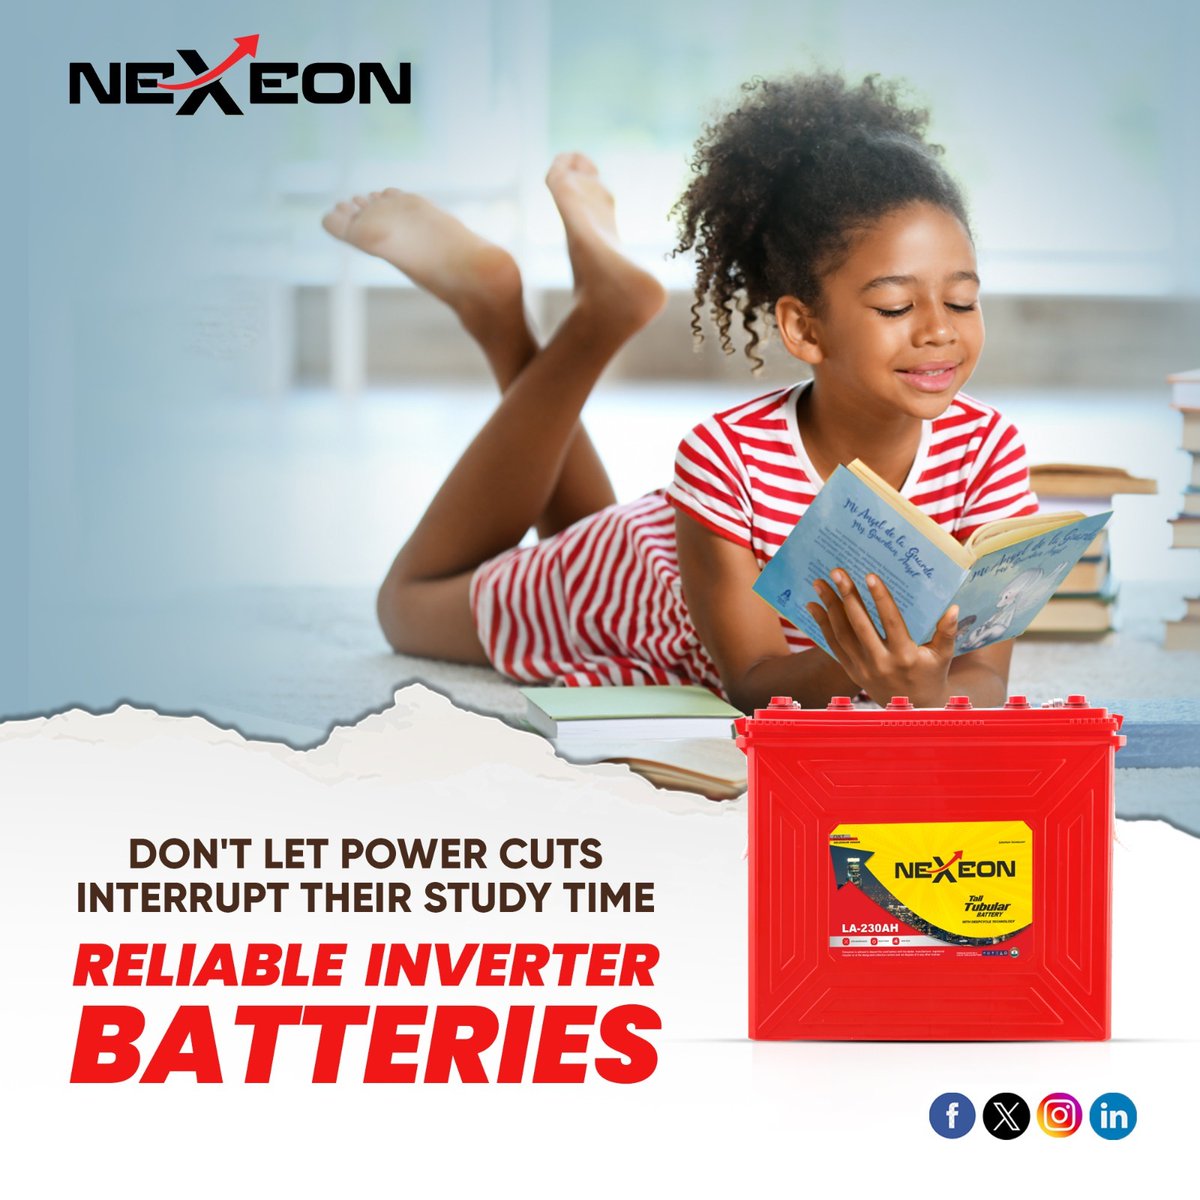 Ensure uninterrupted study time for your children with Nexeon #inverterbattery Its reliable power backup keeps your home powered during outages, so your kids can focus on learning without interruptions.

Follow us: @nexeonbatteries 

#NexeonBattery #Battery #TallTubularbattery